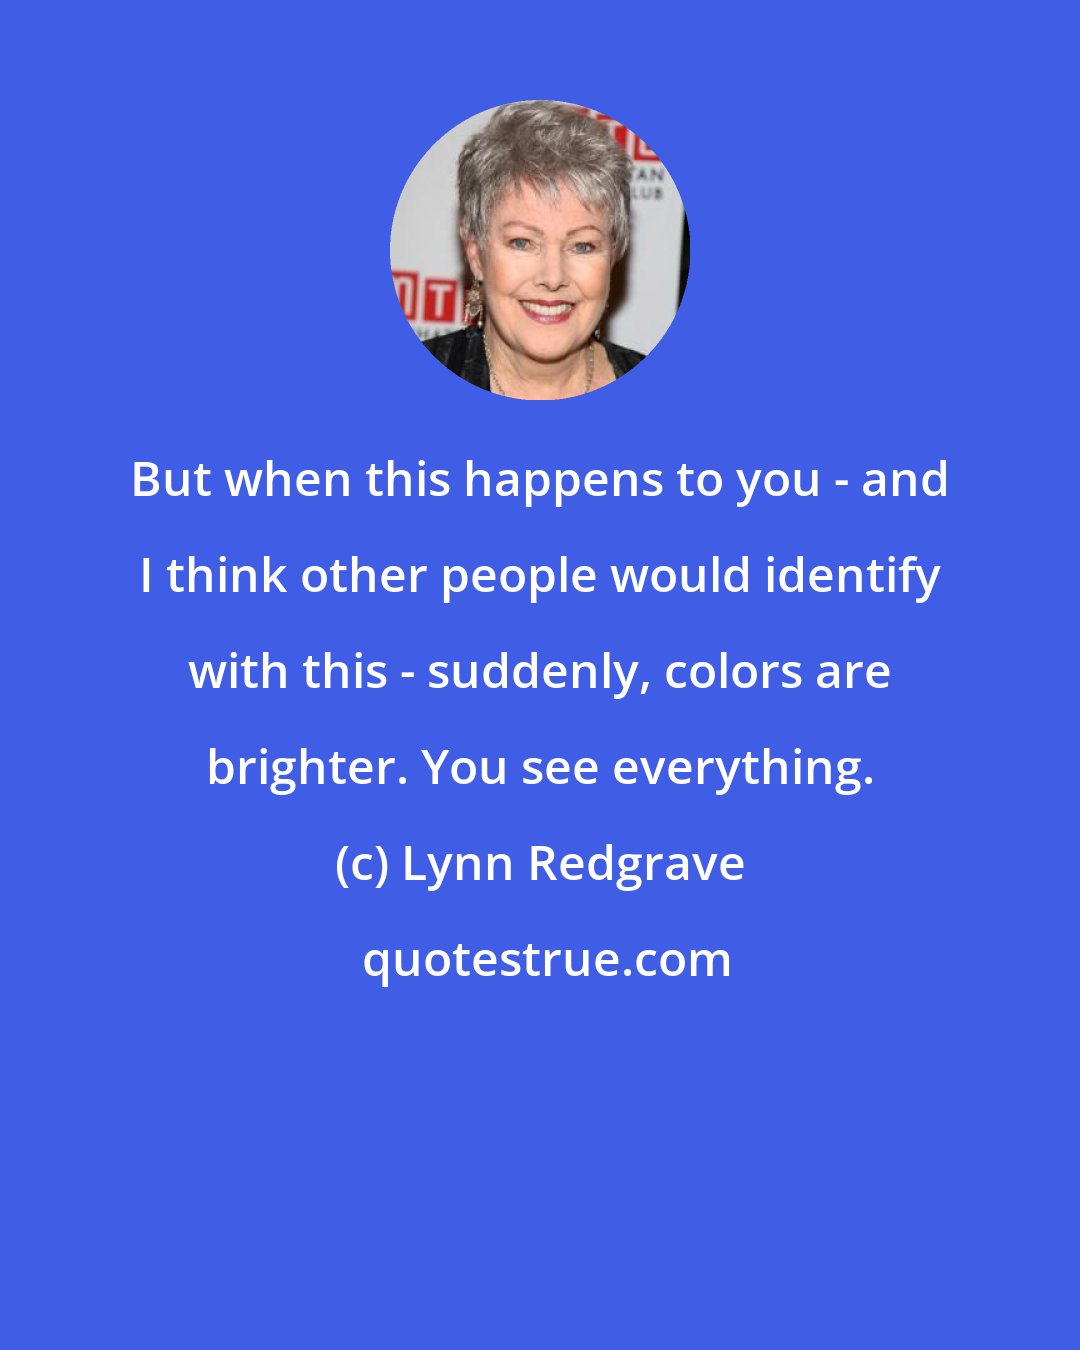 Lynn Redgrave: But when this happens to you - and I think other people would identify with this - suddenly, colors are brighter. You see everything.